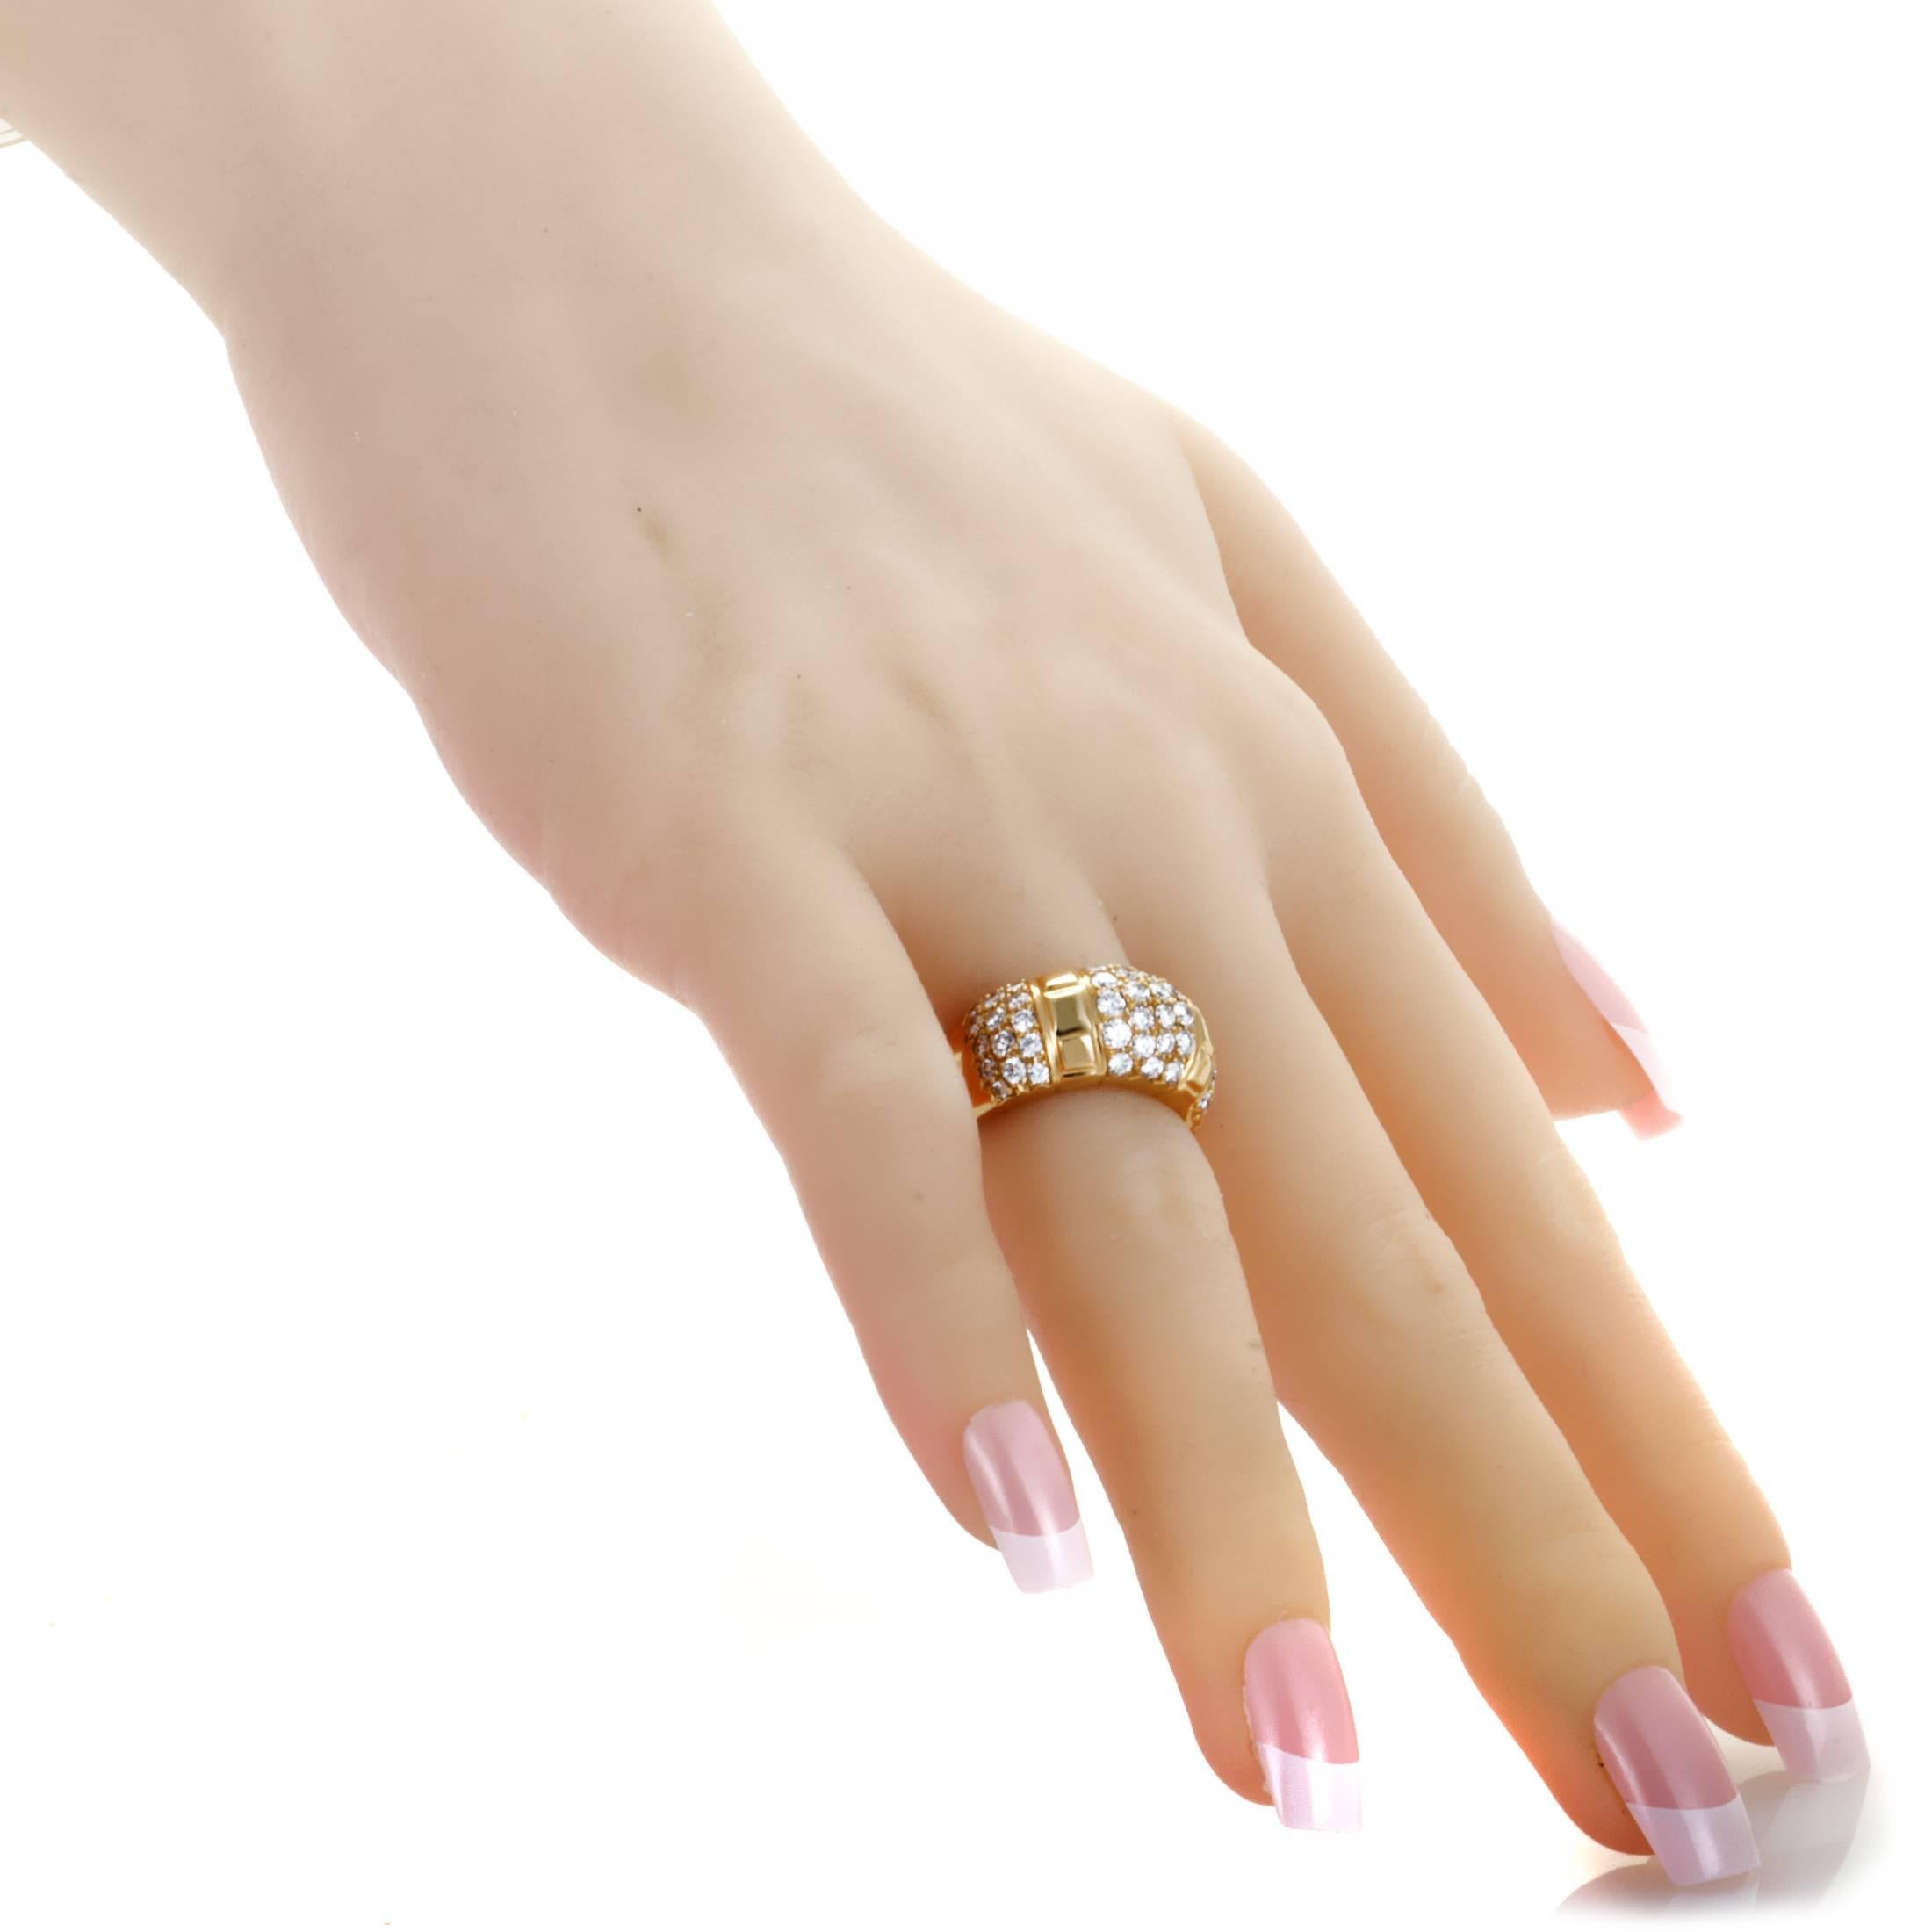 Women's Van Cleef & Arpels Diamond Pave Yellow Gold Band Ring